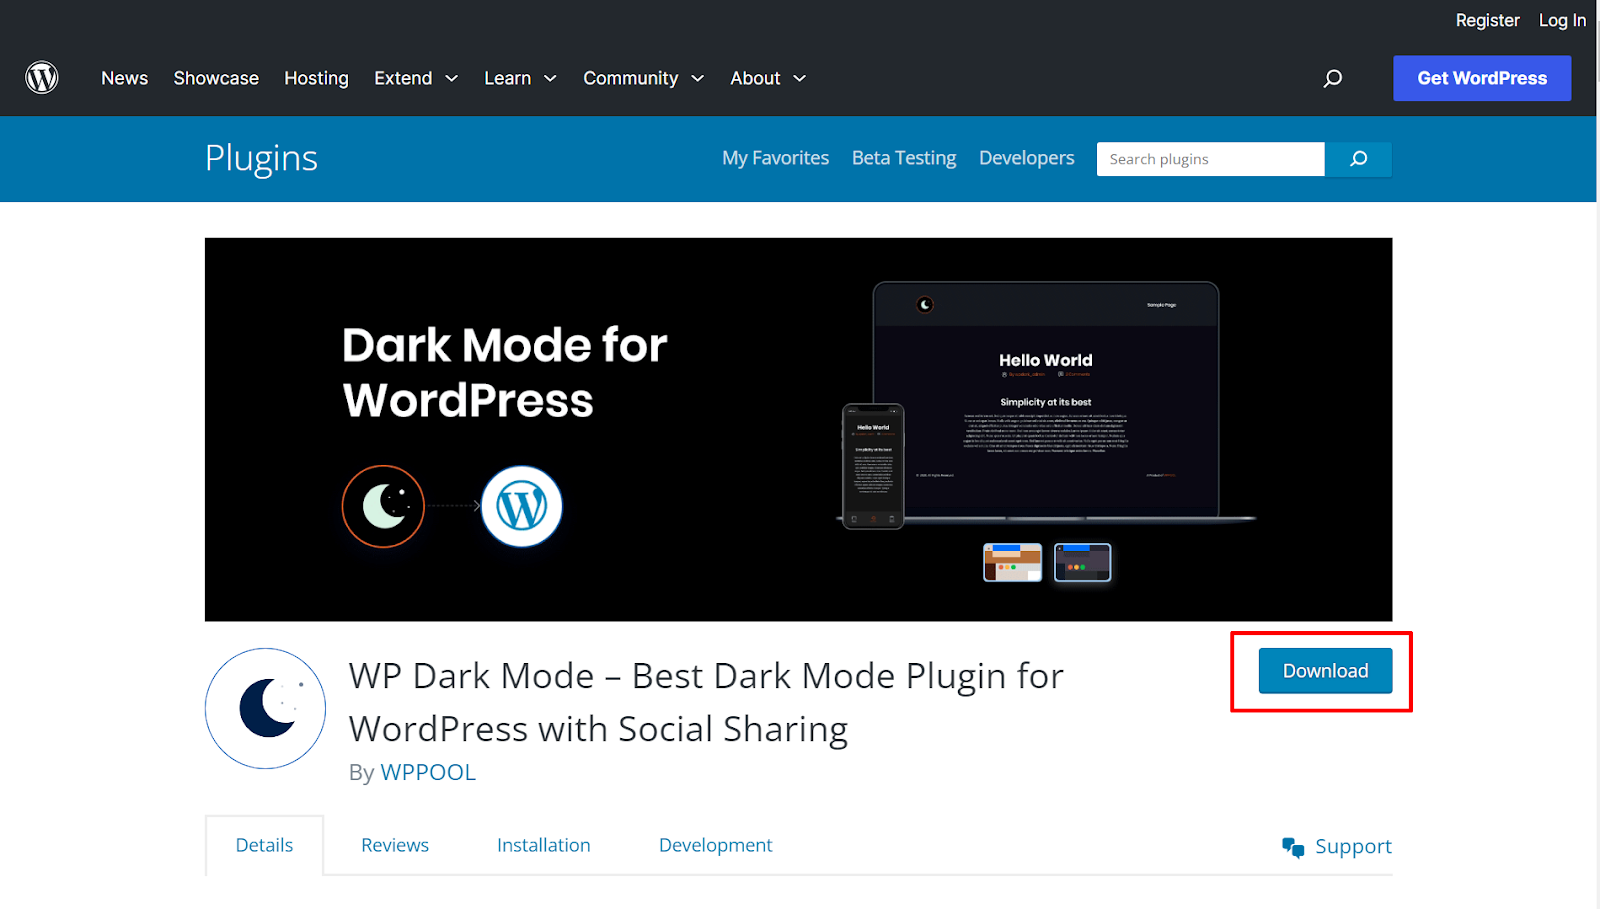 How to Get Started with WP Dark Mode (Free & Ultimate)